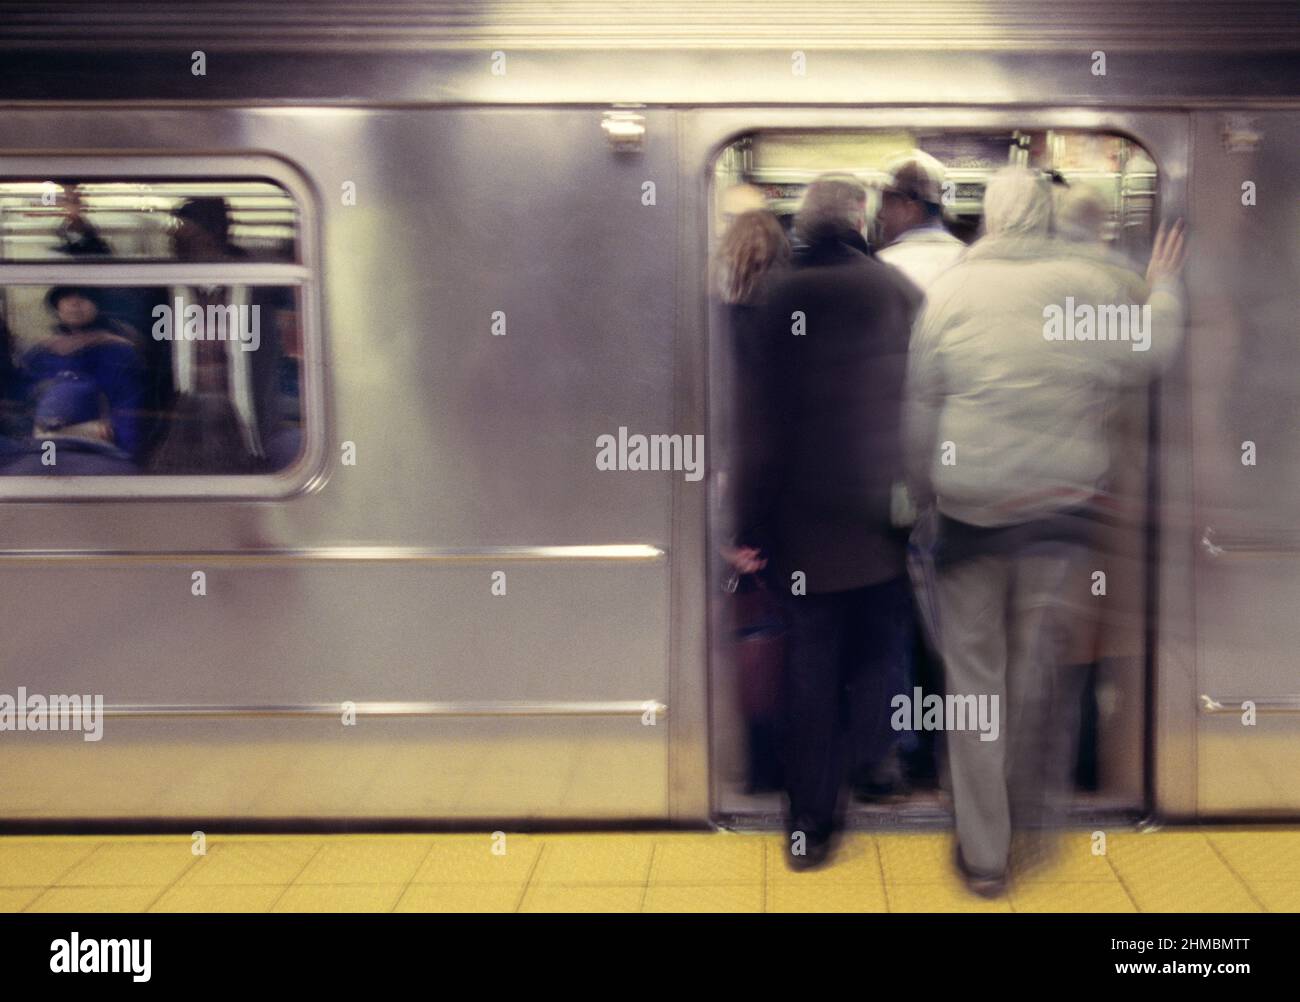 Subway car overcrowding departure. New York City Transit Authority public transportation at rush hour. Open subway train door people pushing to enter. Stock Photo